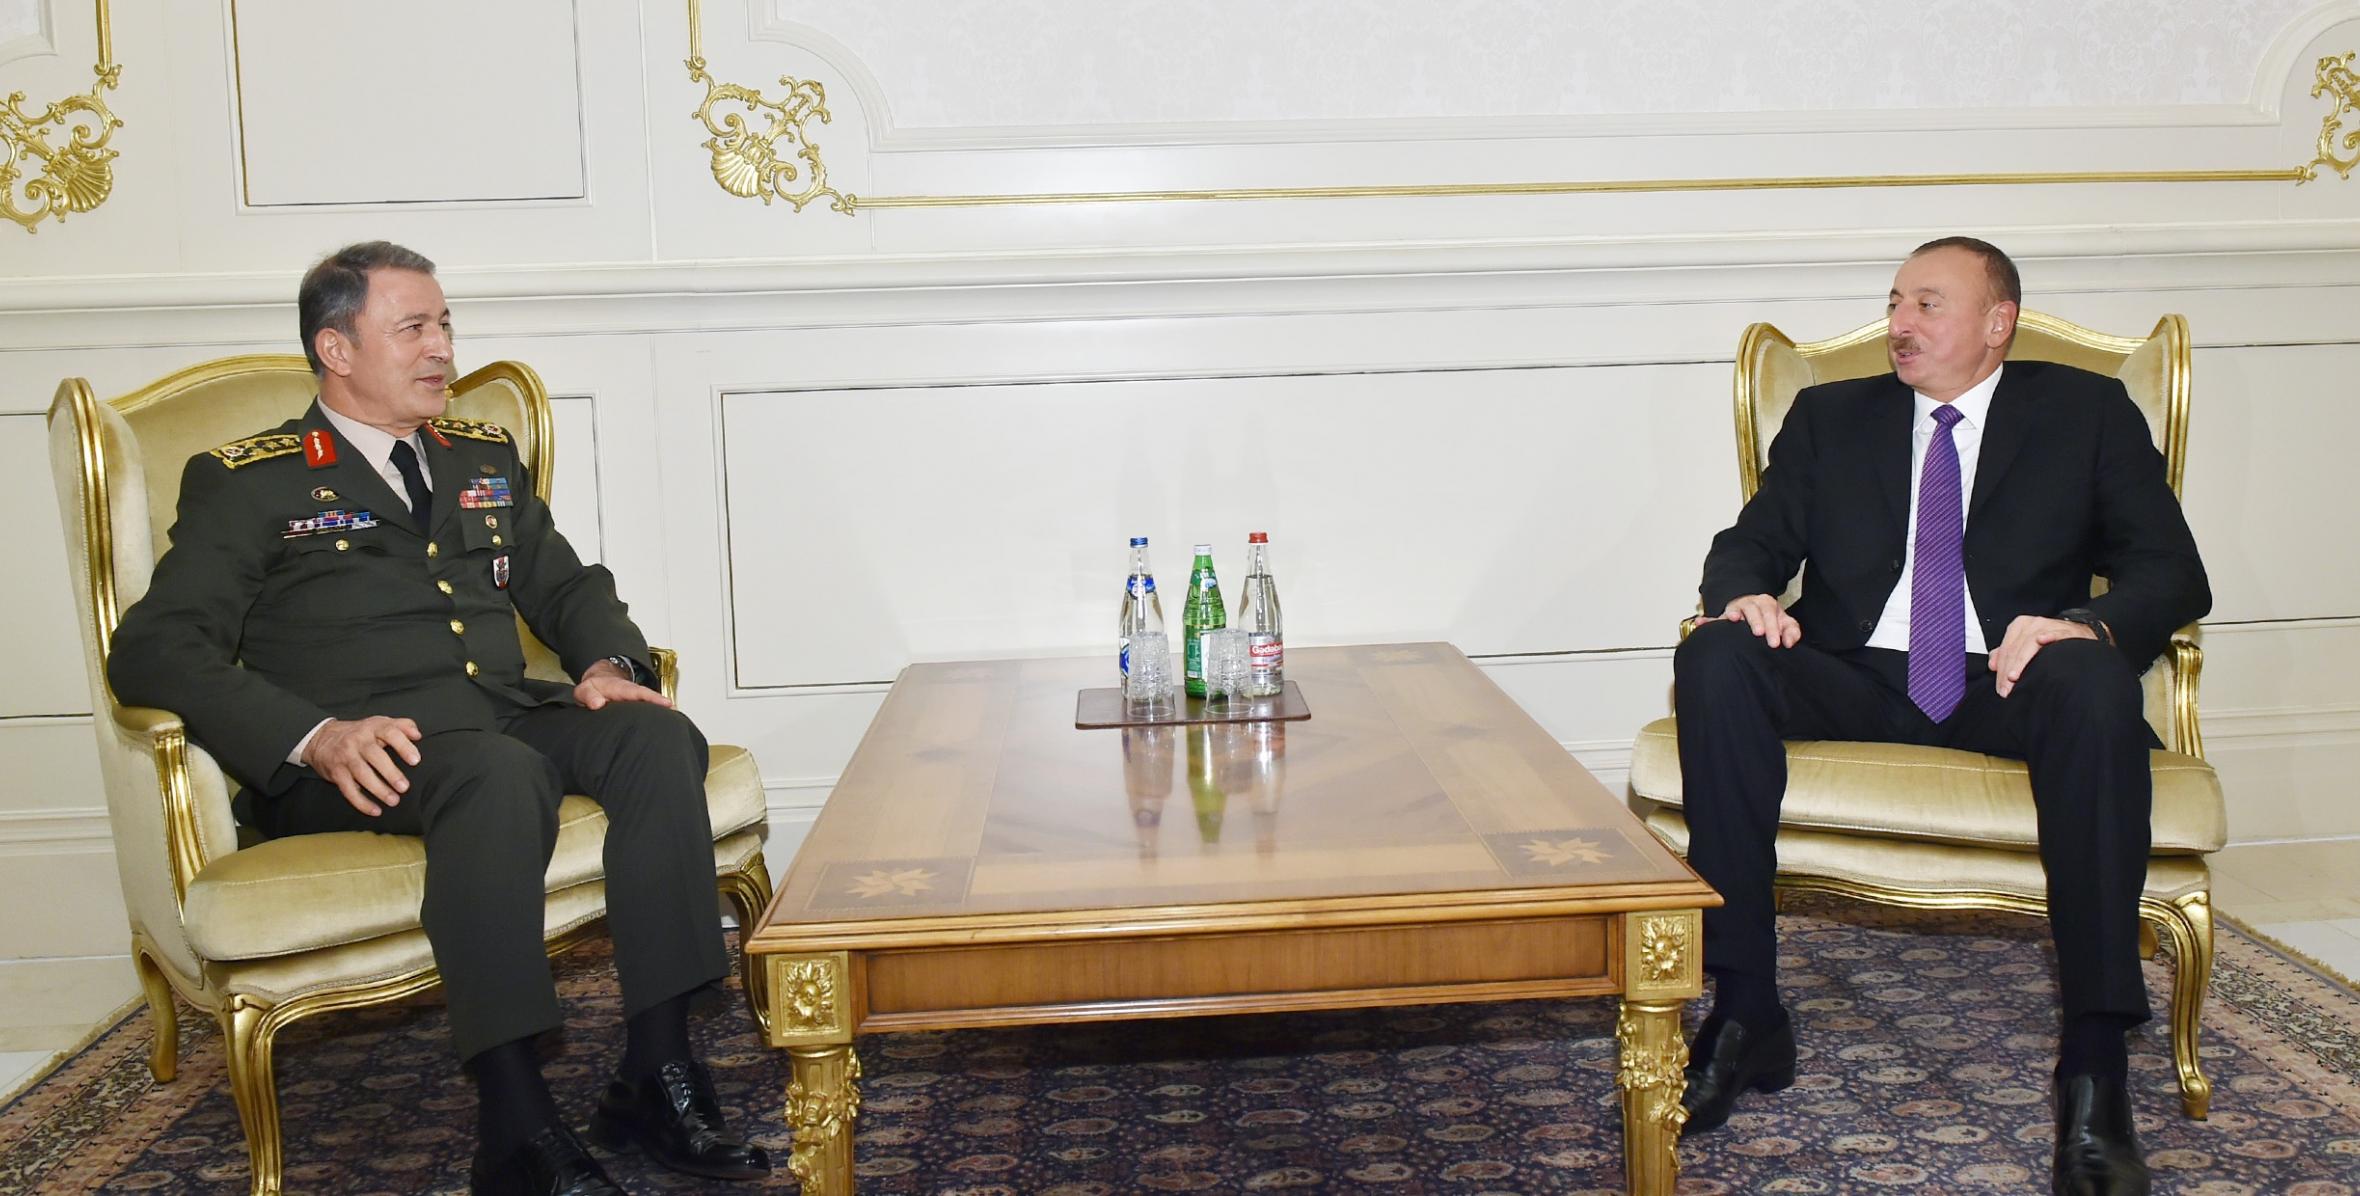 Ilham Aliyev received a delegation led by the Chief of the General Staff of the Turkish Armed Forces